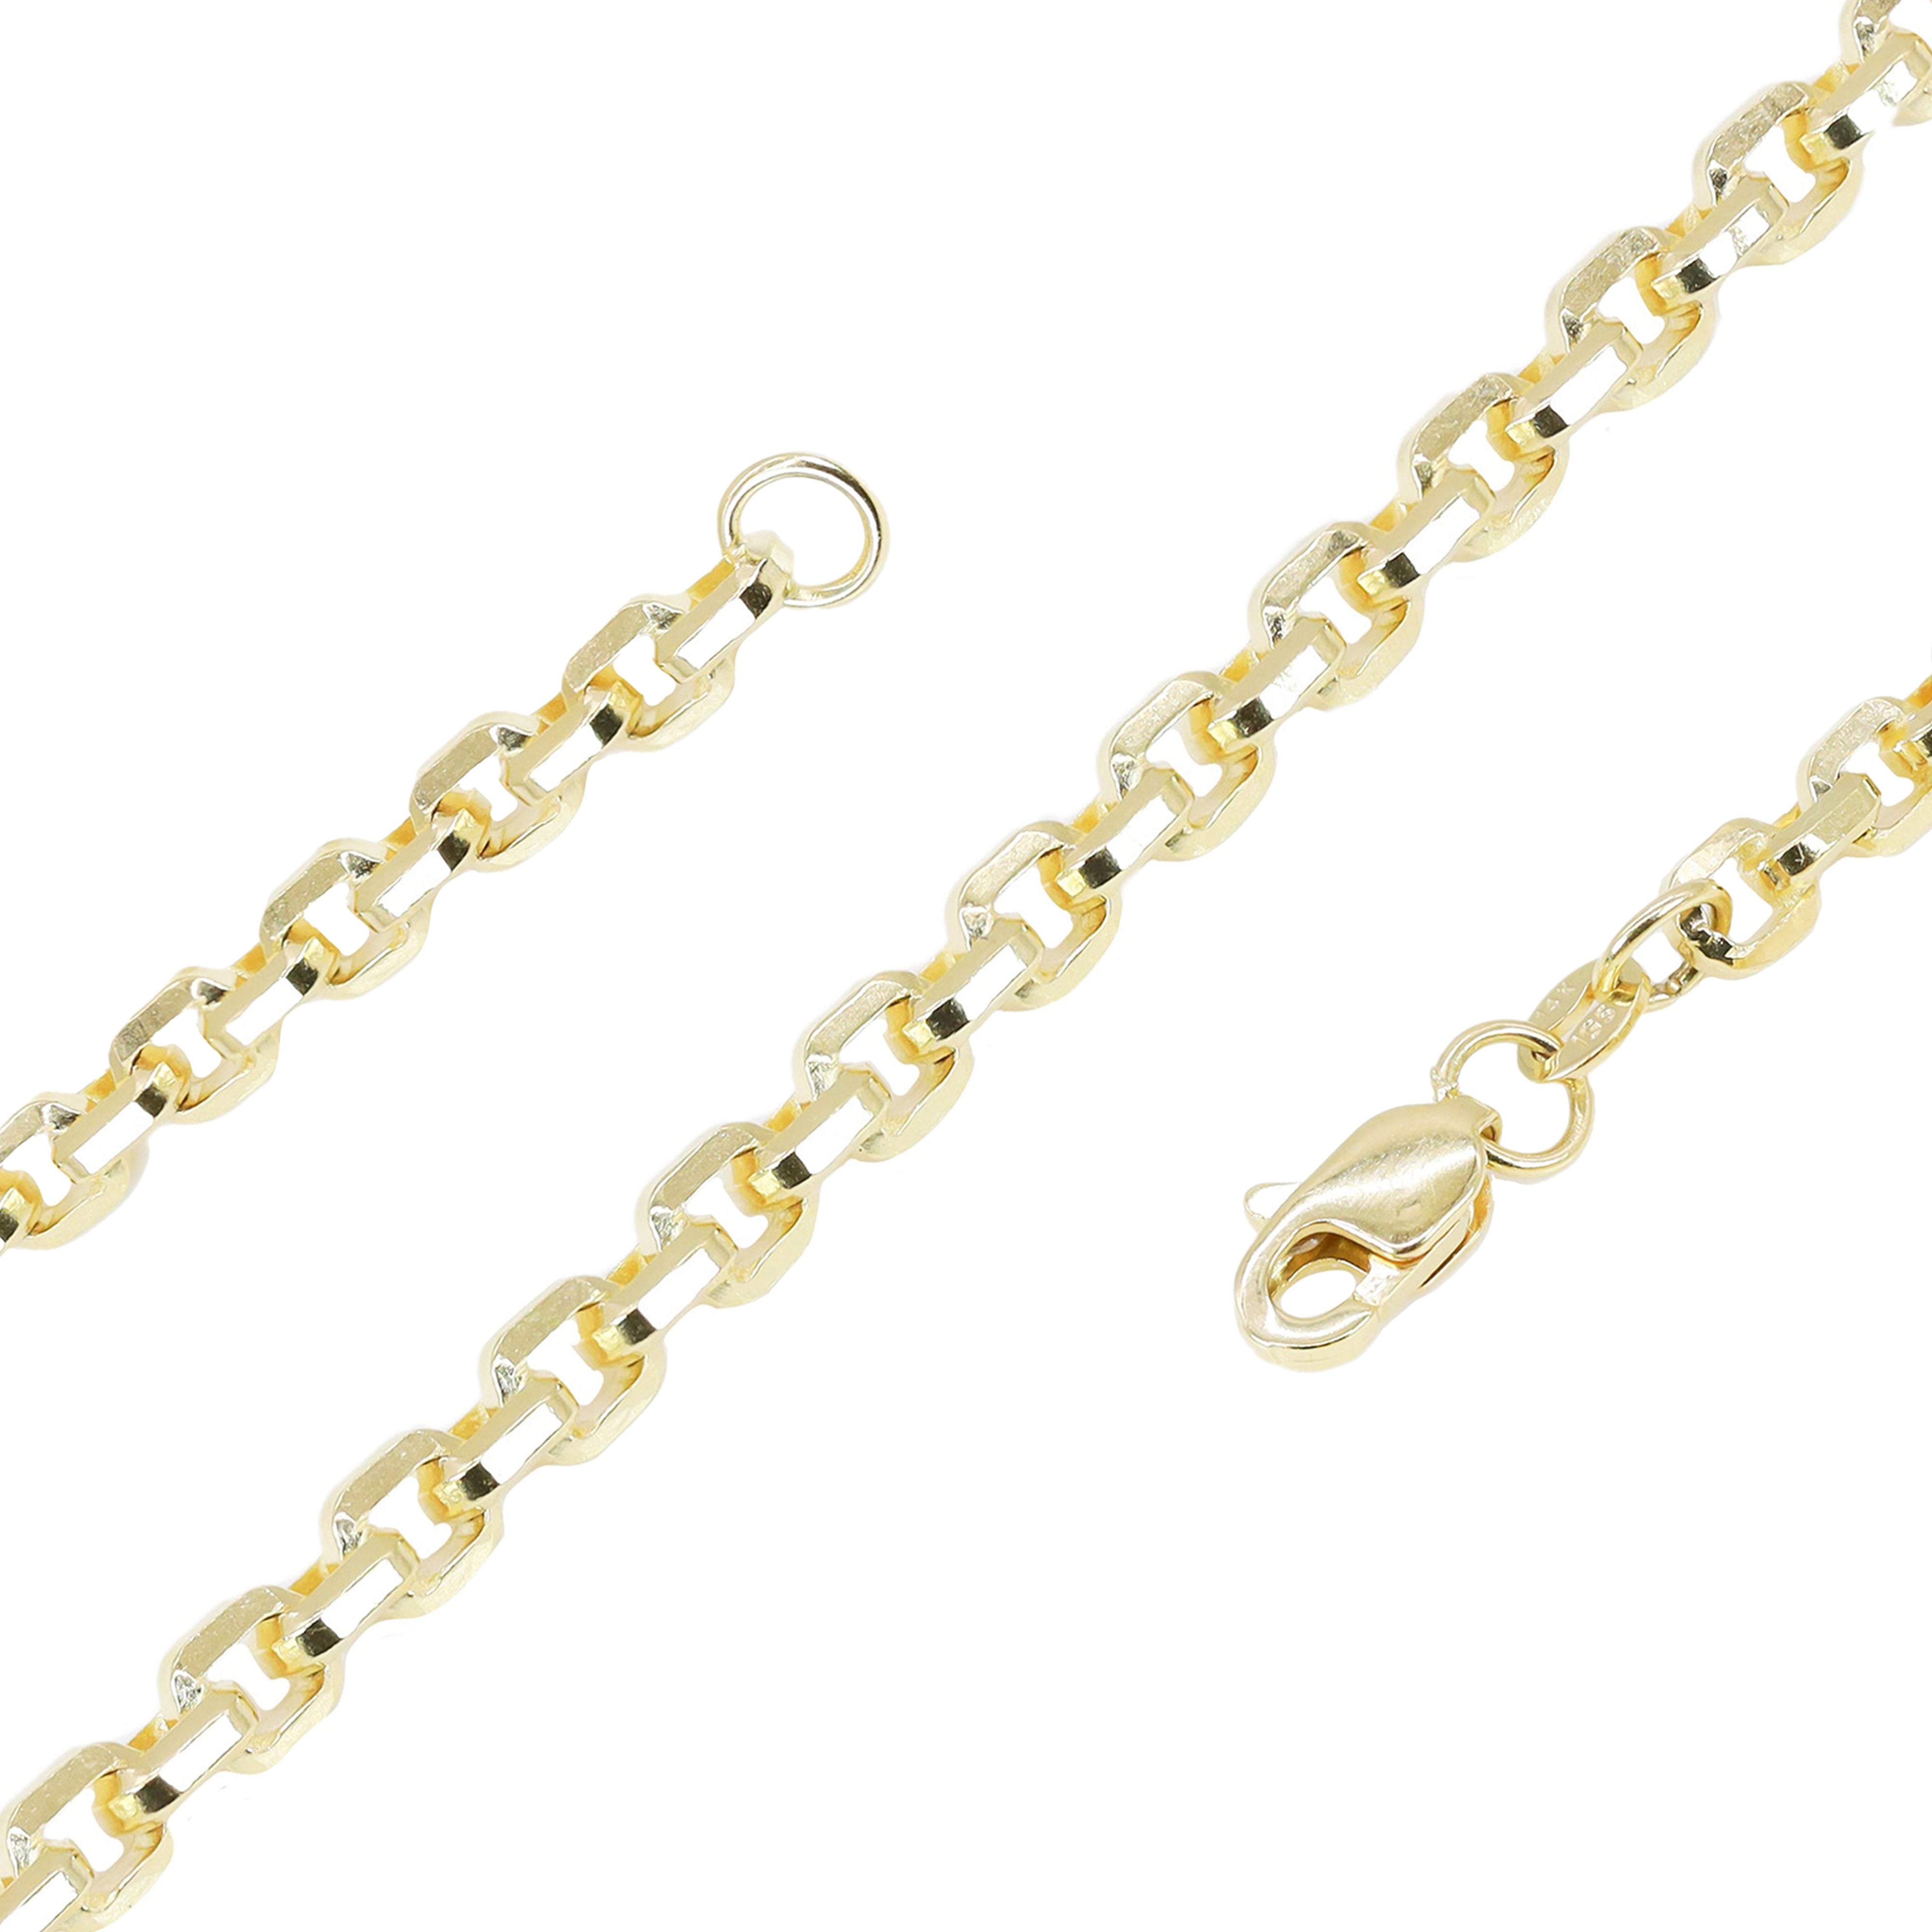 10KT Solid Hermes Link Yellow Gold Chain